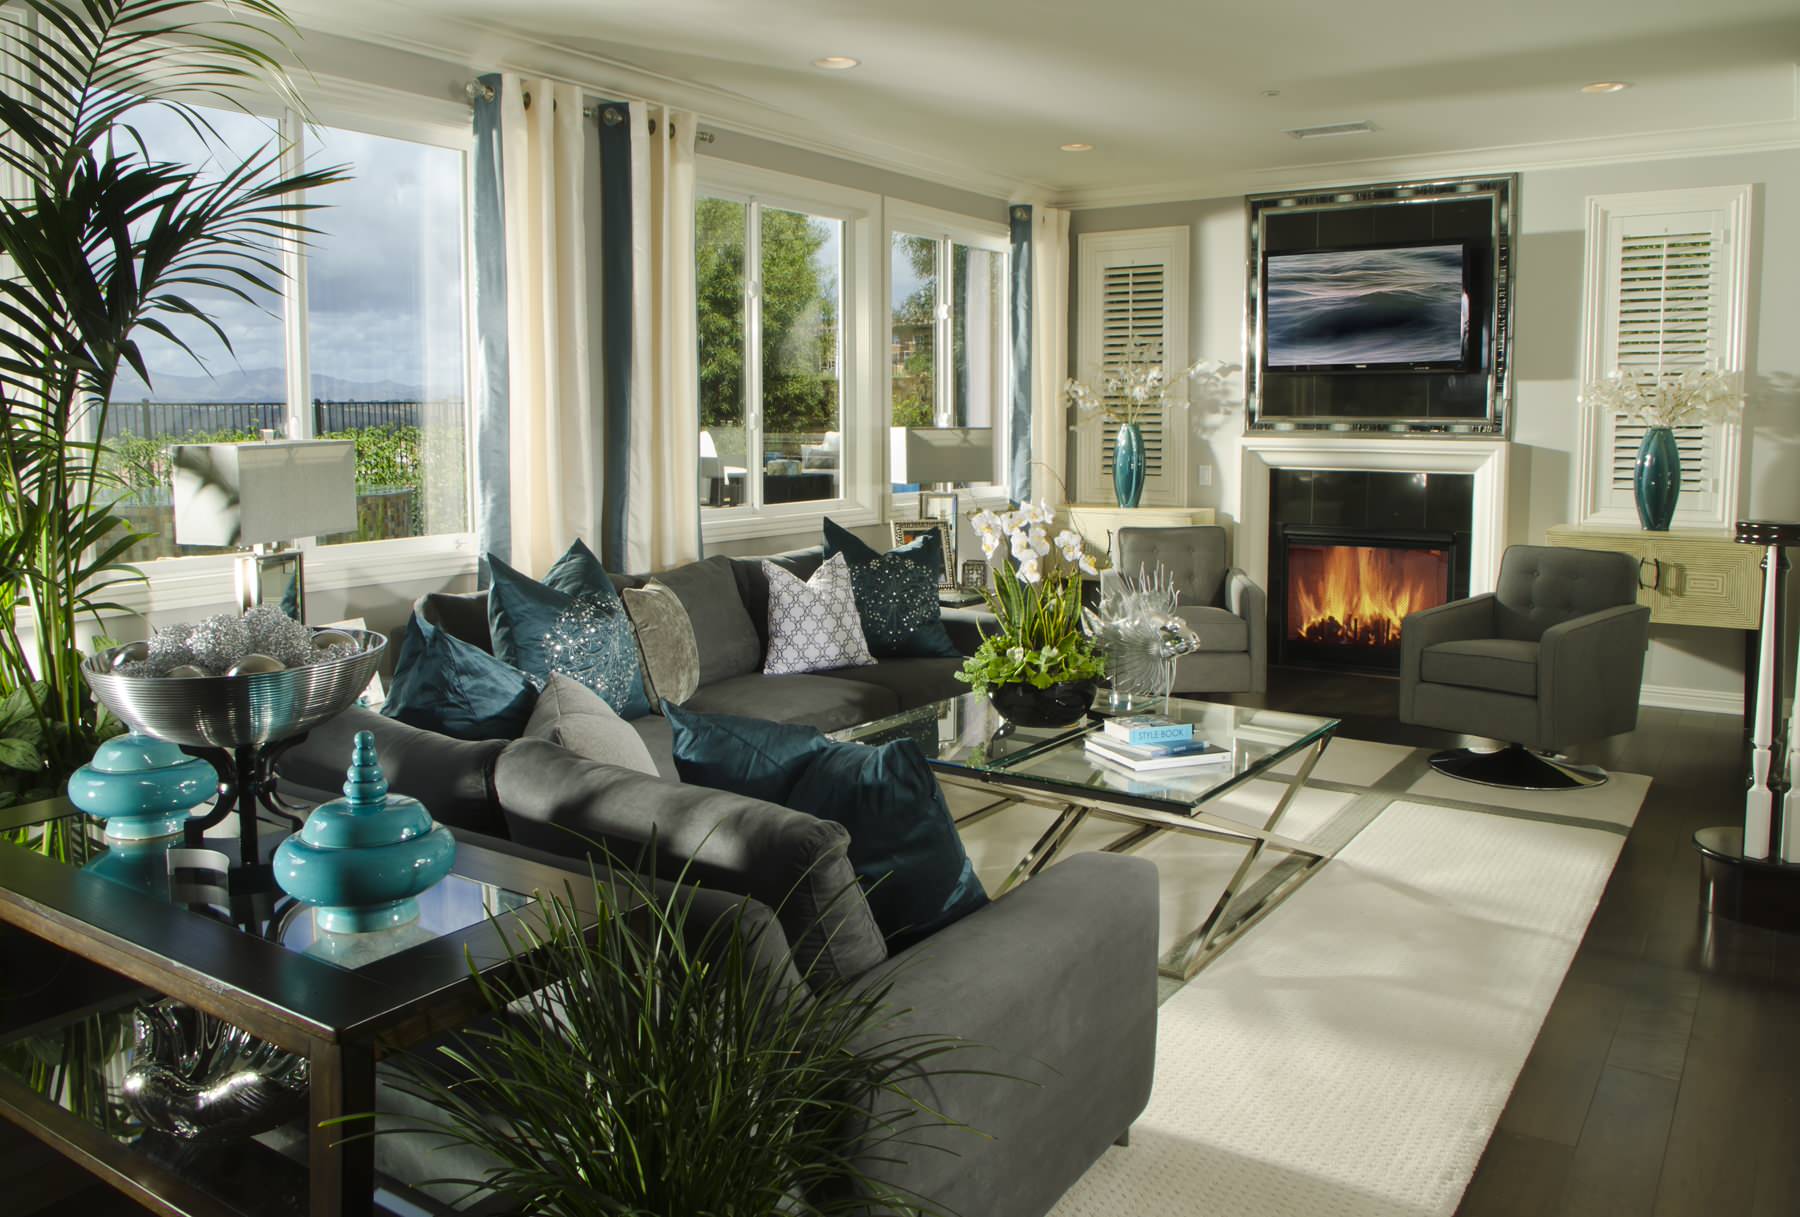 75 Beautiful Grey And Teal Living Room Ideas Designs September 2021 Houzz Uk - Grey And Turquoise Living Room Decor Ideas